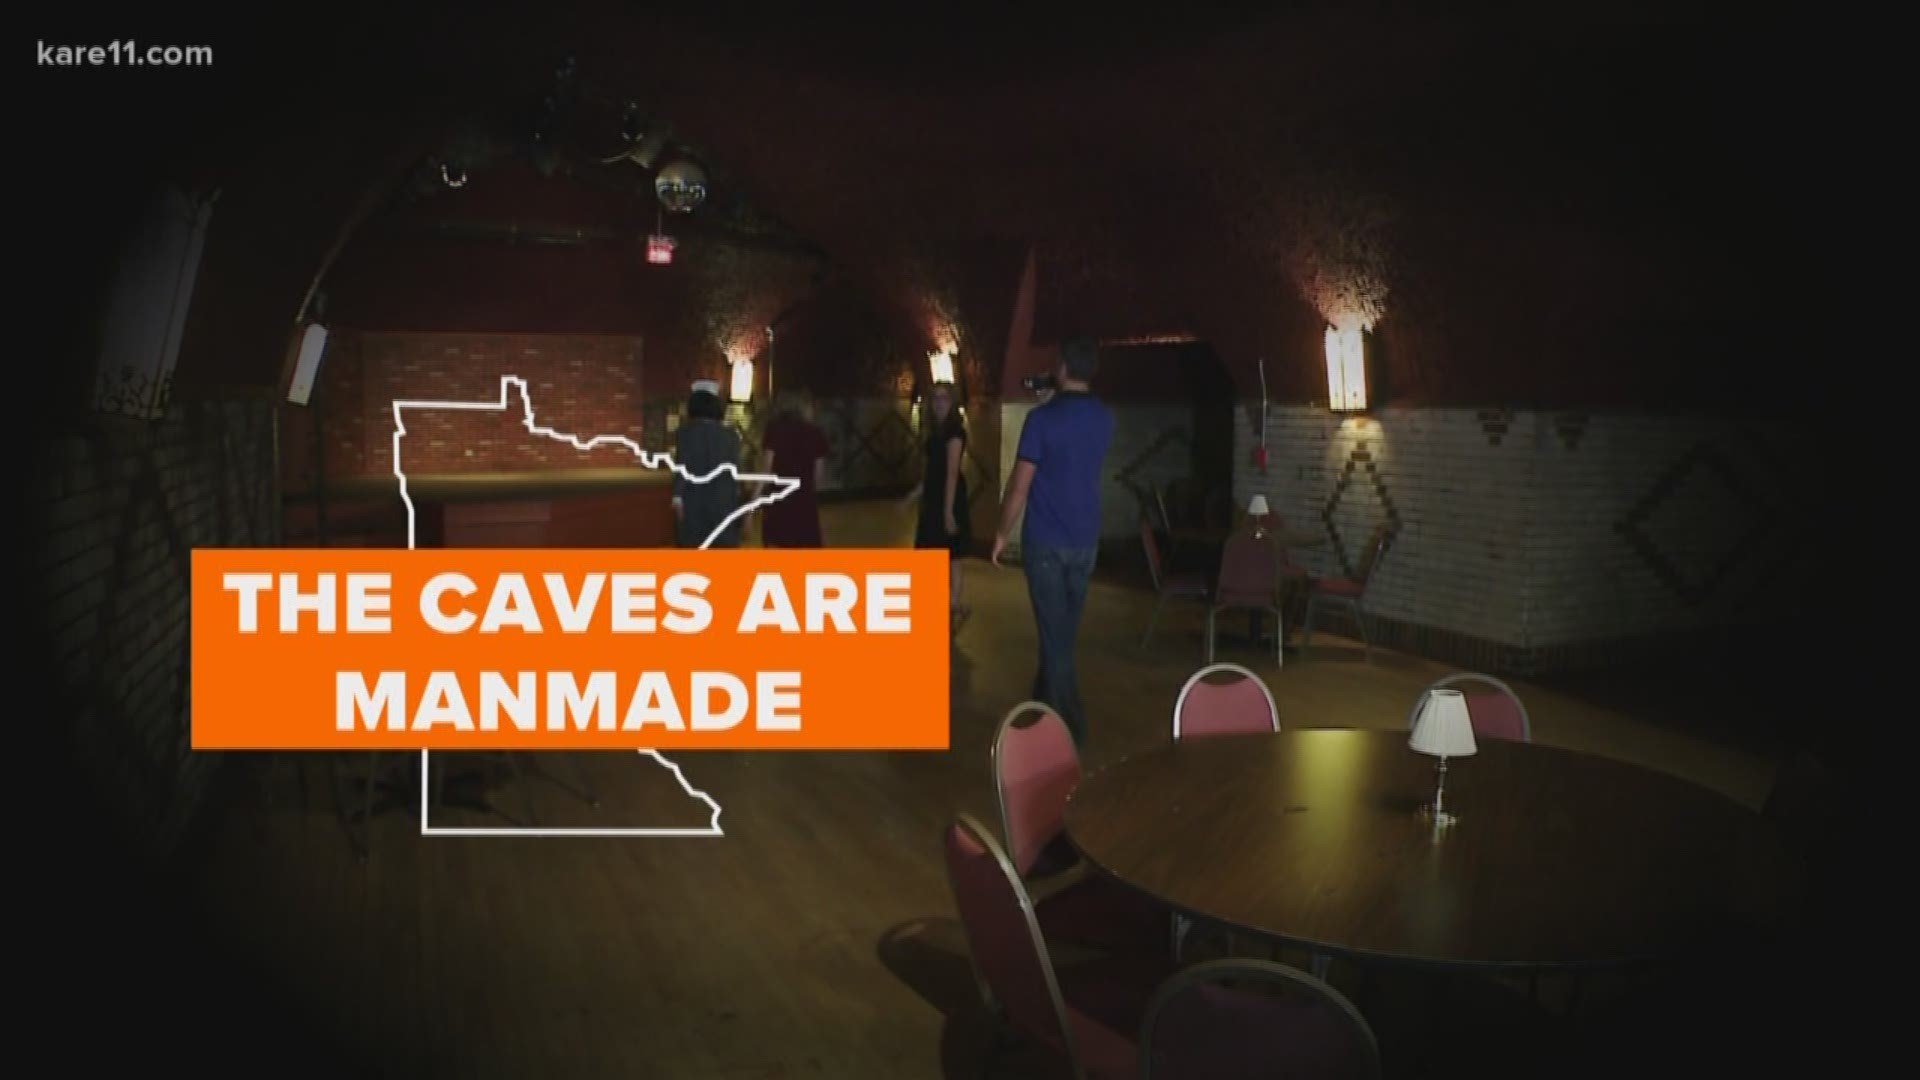 It's known as one of the most haunted places in St. Paul, so we went to the Wabasha Street Caves to see if we could find any ghosts! https://kare11.tv/2D02Jpg